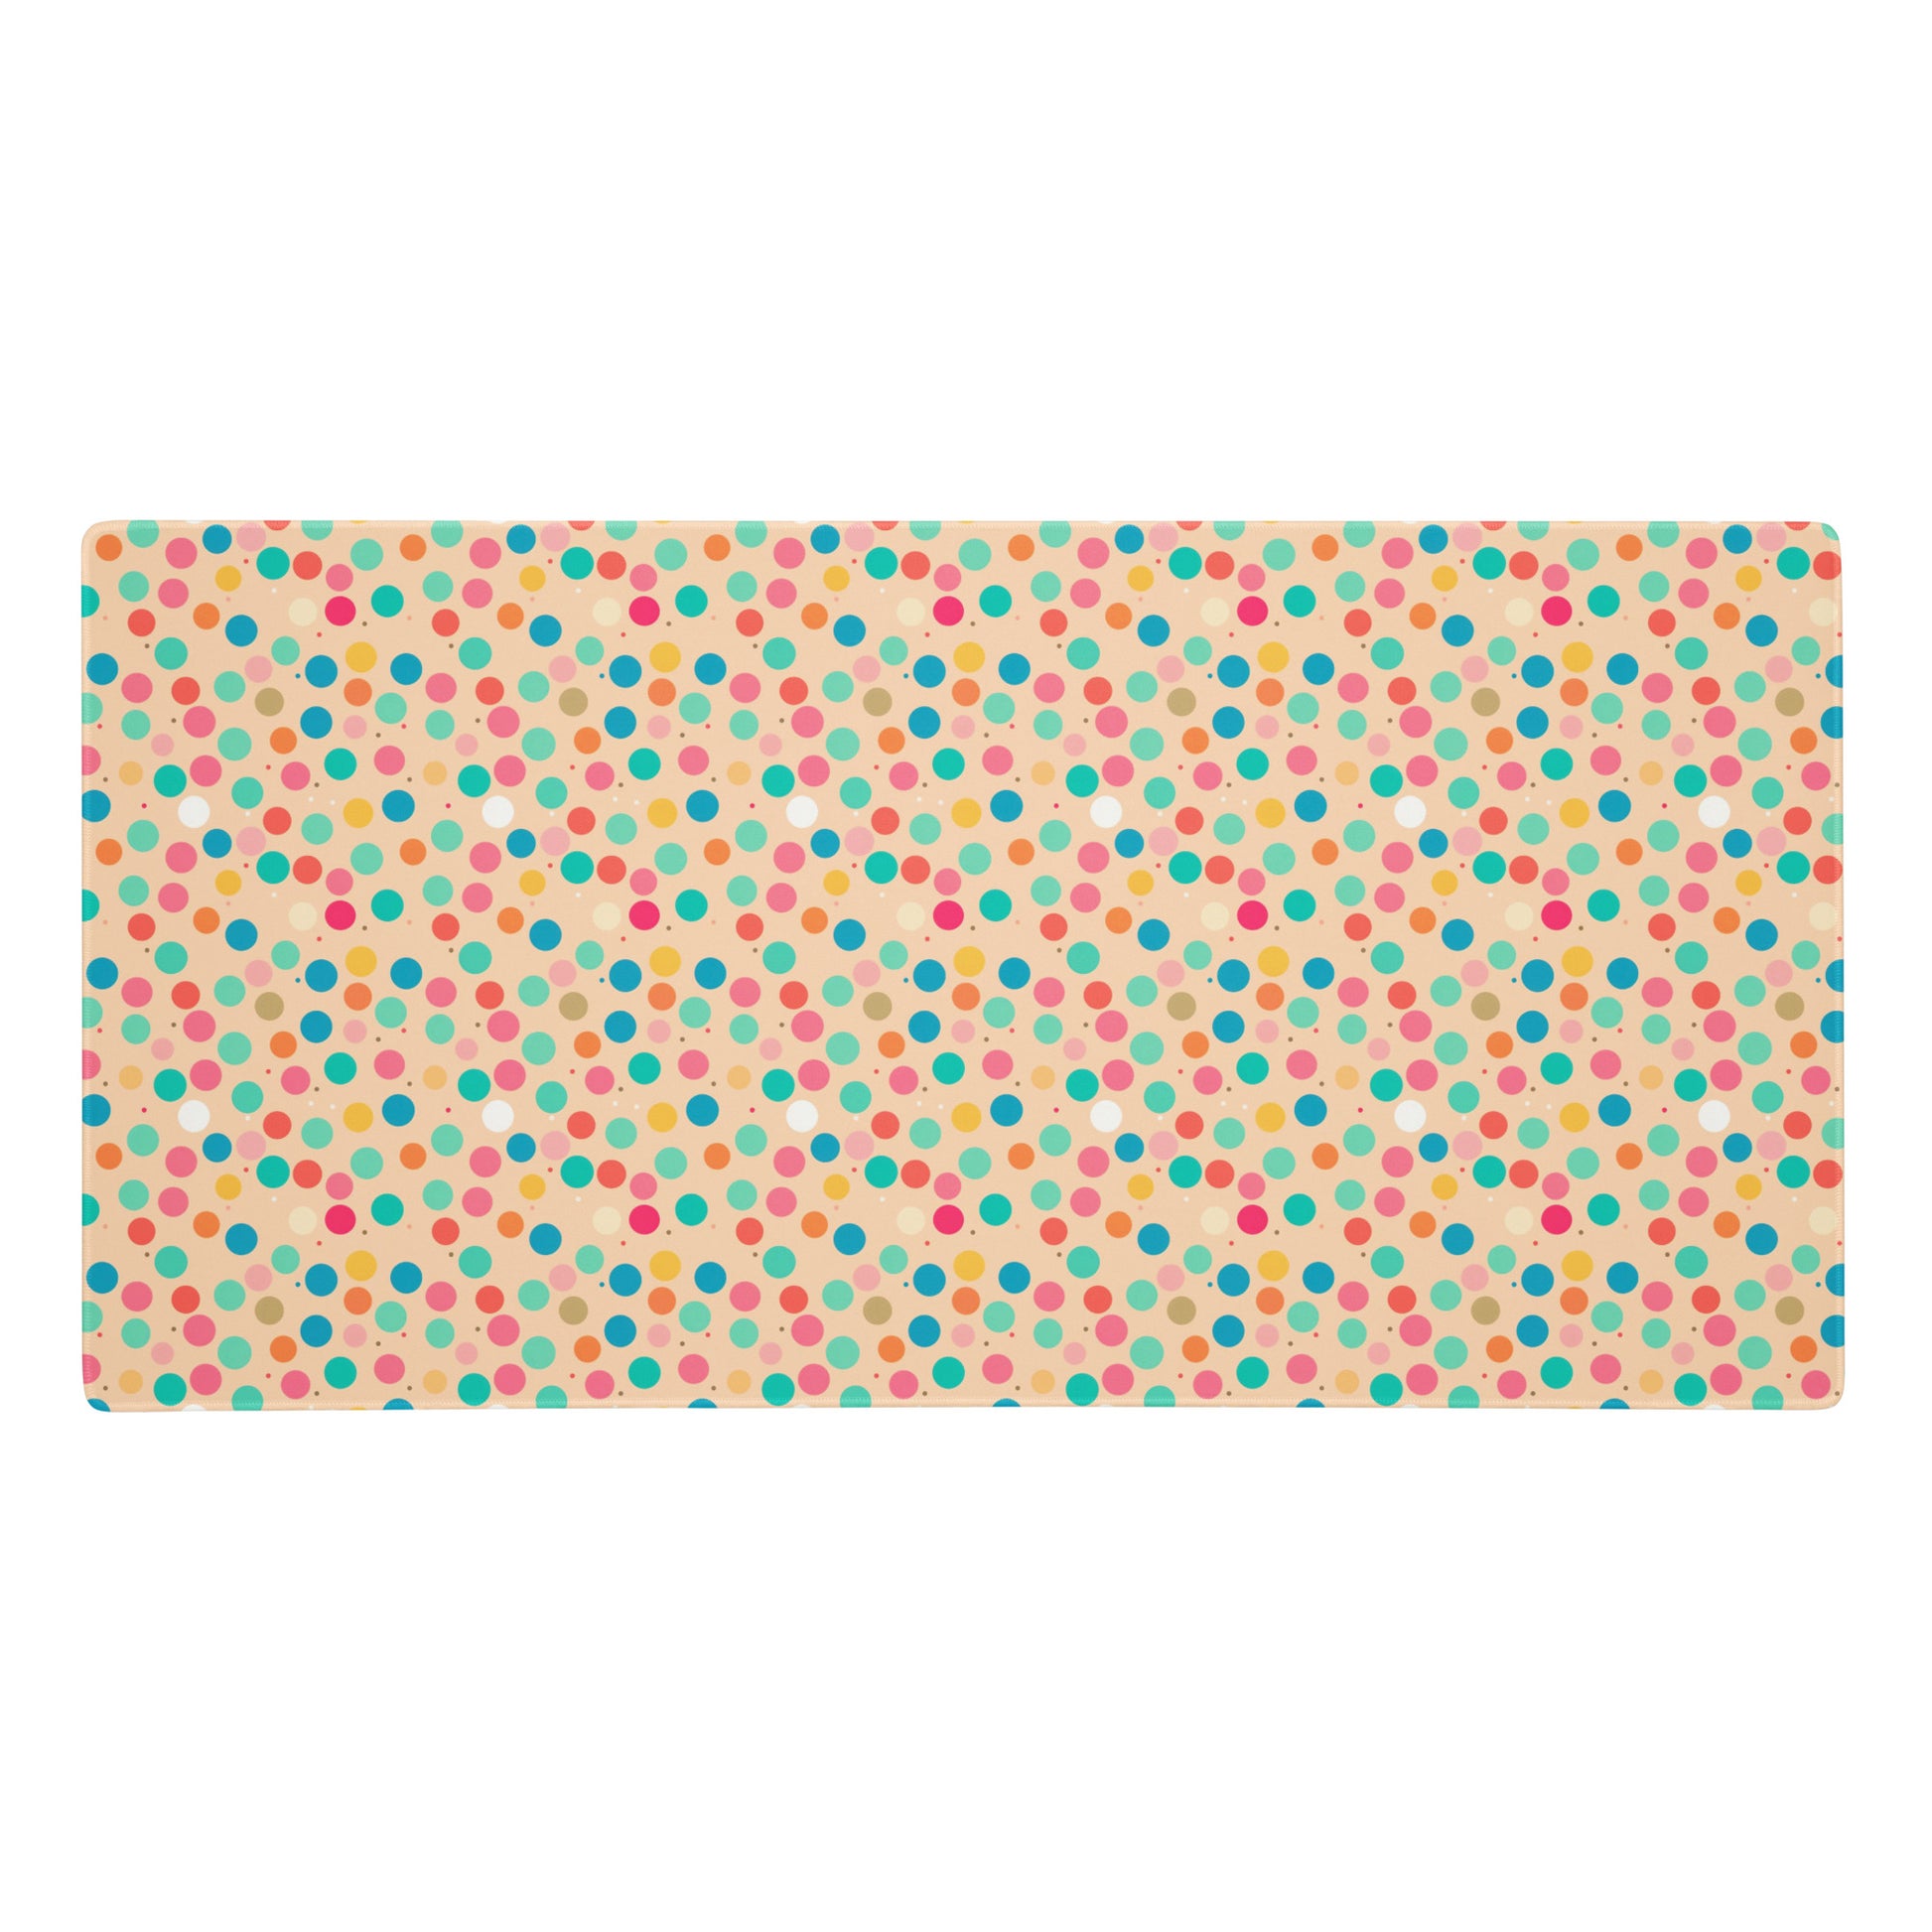 A 36" x 18" desk pad with a colorful polka dot pattern.